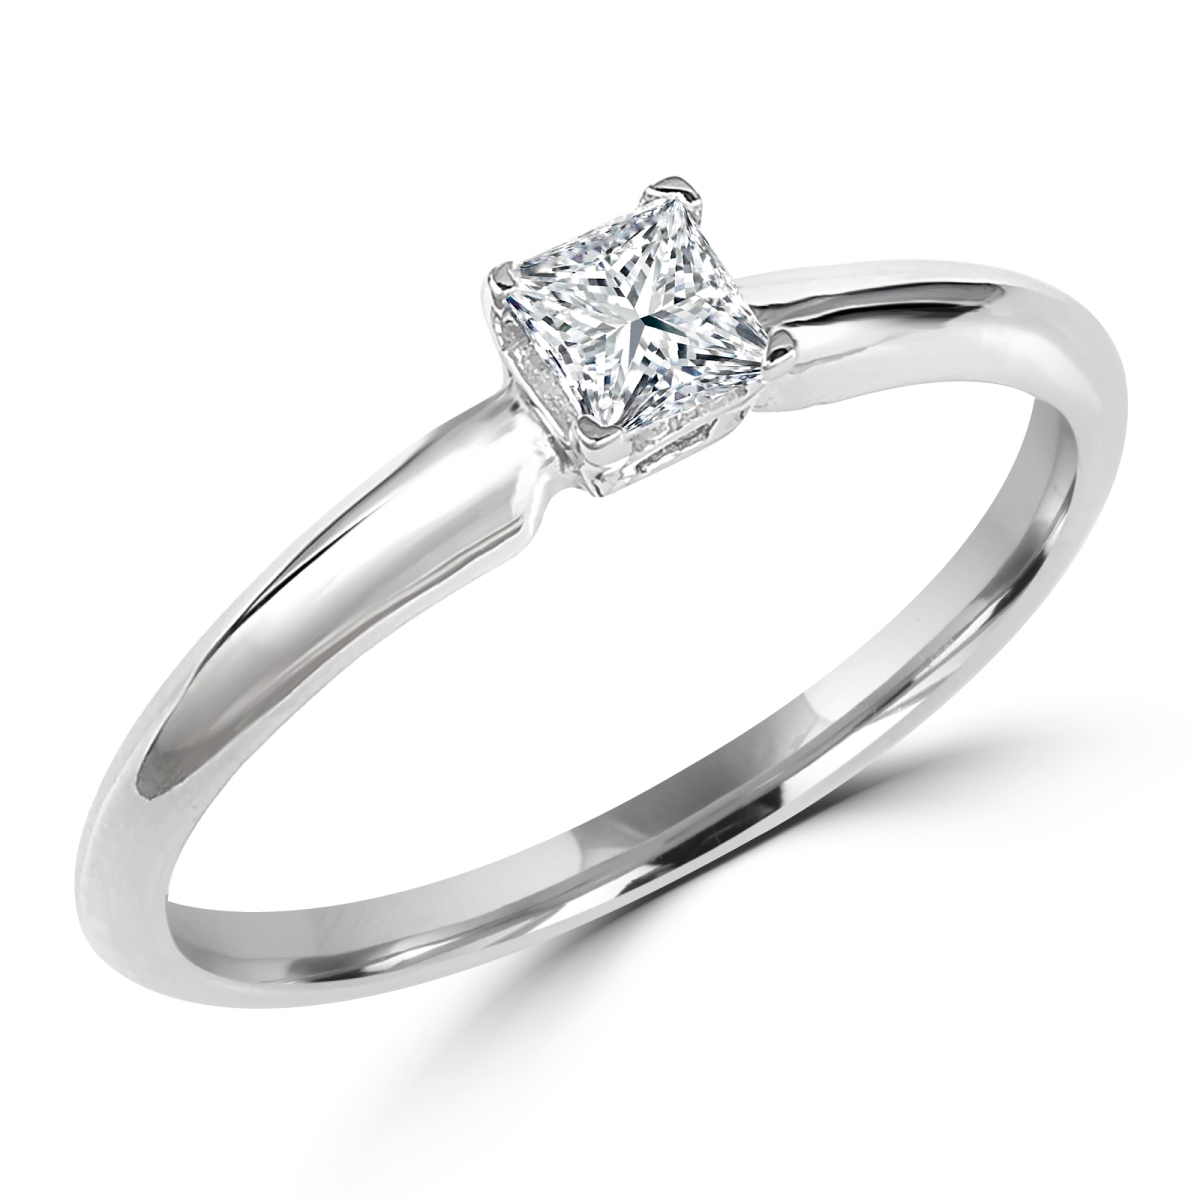 Picture of Majesty Diamonds MD170184-8.5 0.5 CT Princess Diamond Solitaire Engagement Ring in 10K White Gold - 8.5